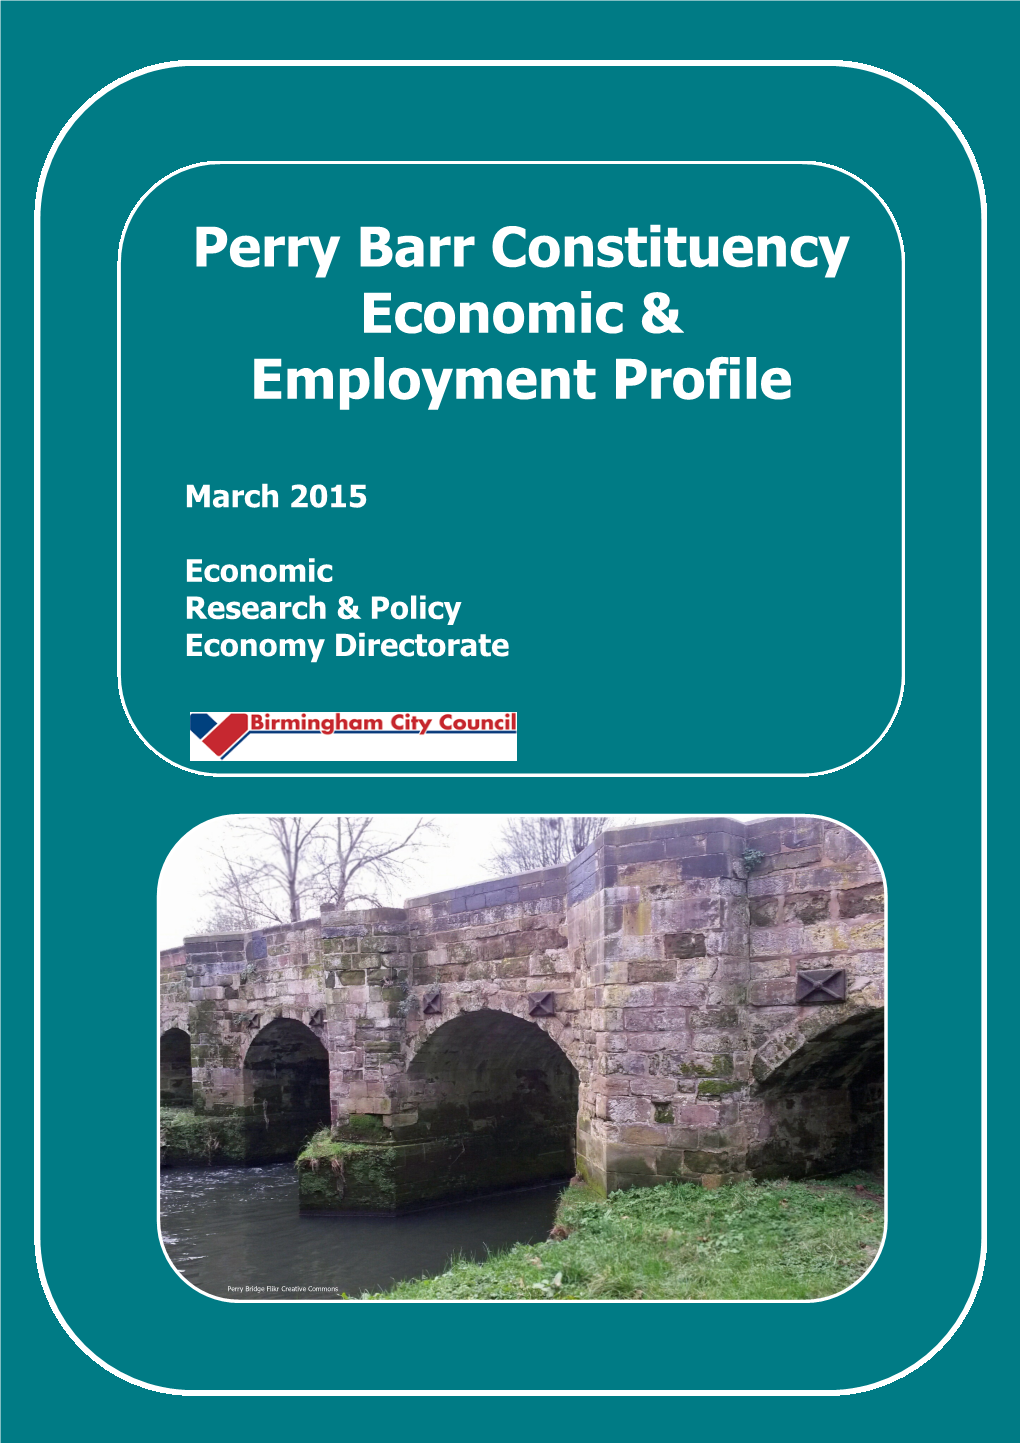 Perry Barr Constituency Economic & Employment Profile